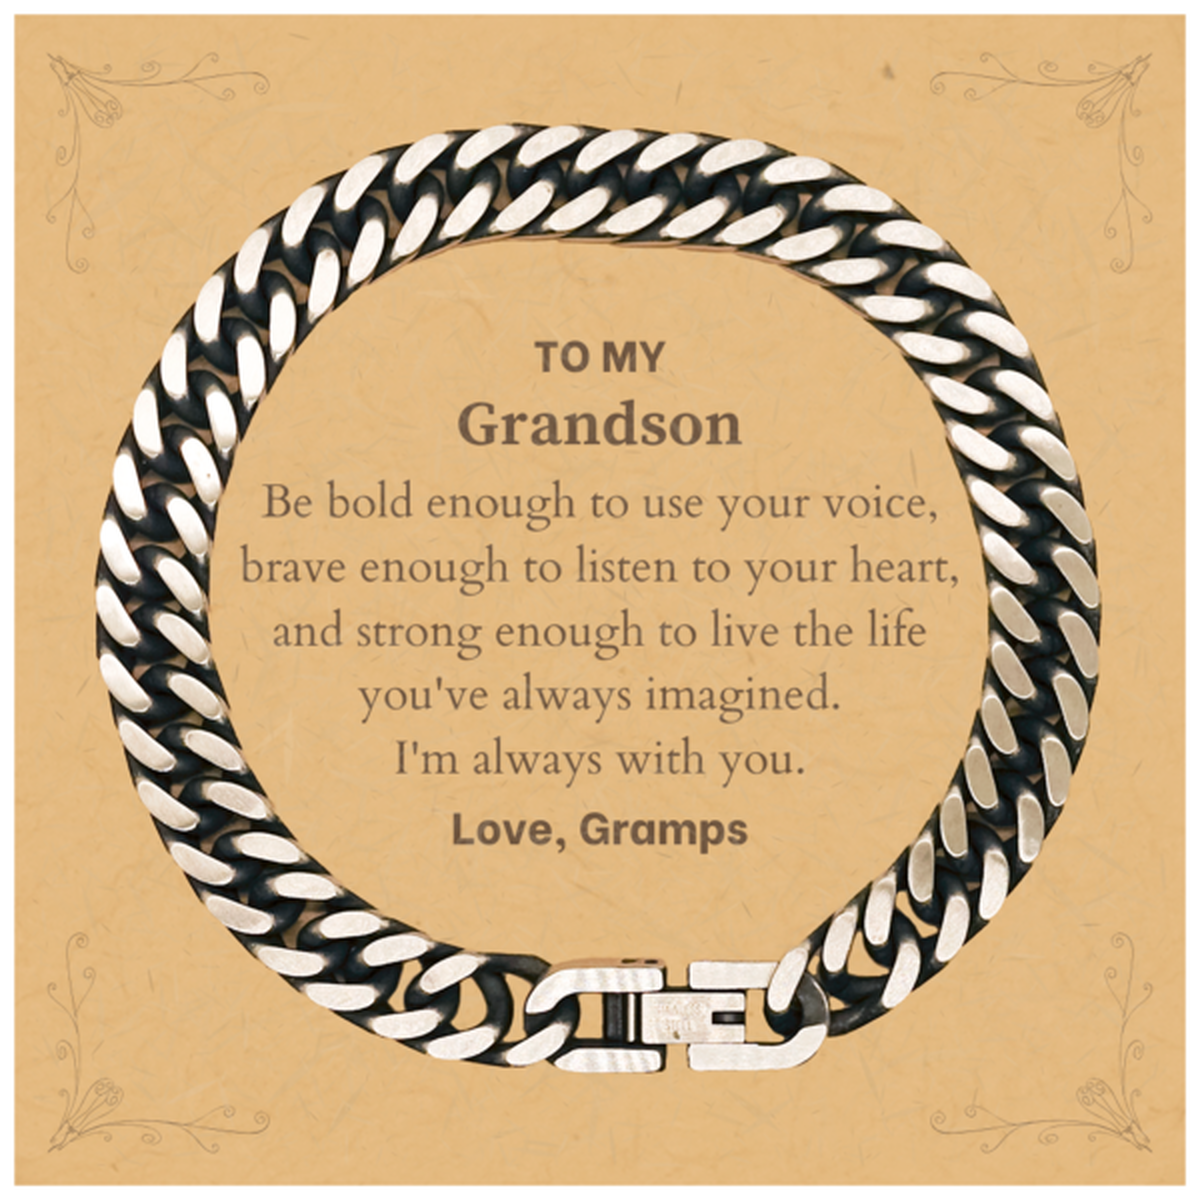 Keepsake Grandson Cuban Link Chain Bracelet Gift Idea Graduation Christmas Birthday Grandson from Gramps, Grandson Be bold enough to use your voice, brave enough to listen to your heart. Love, Gramps